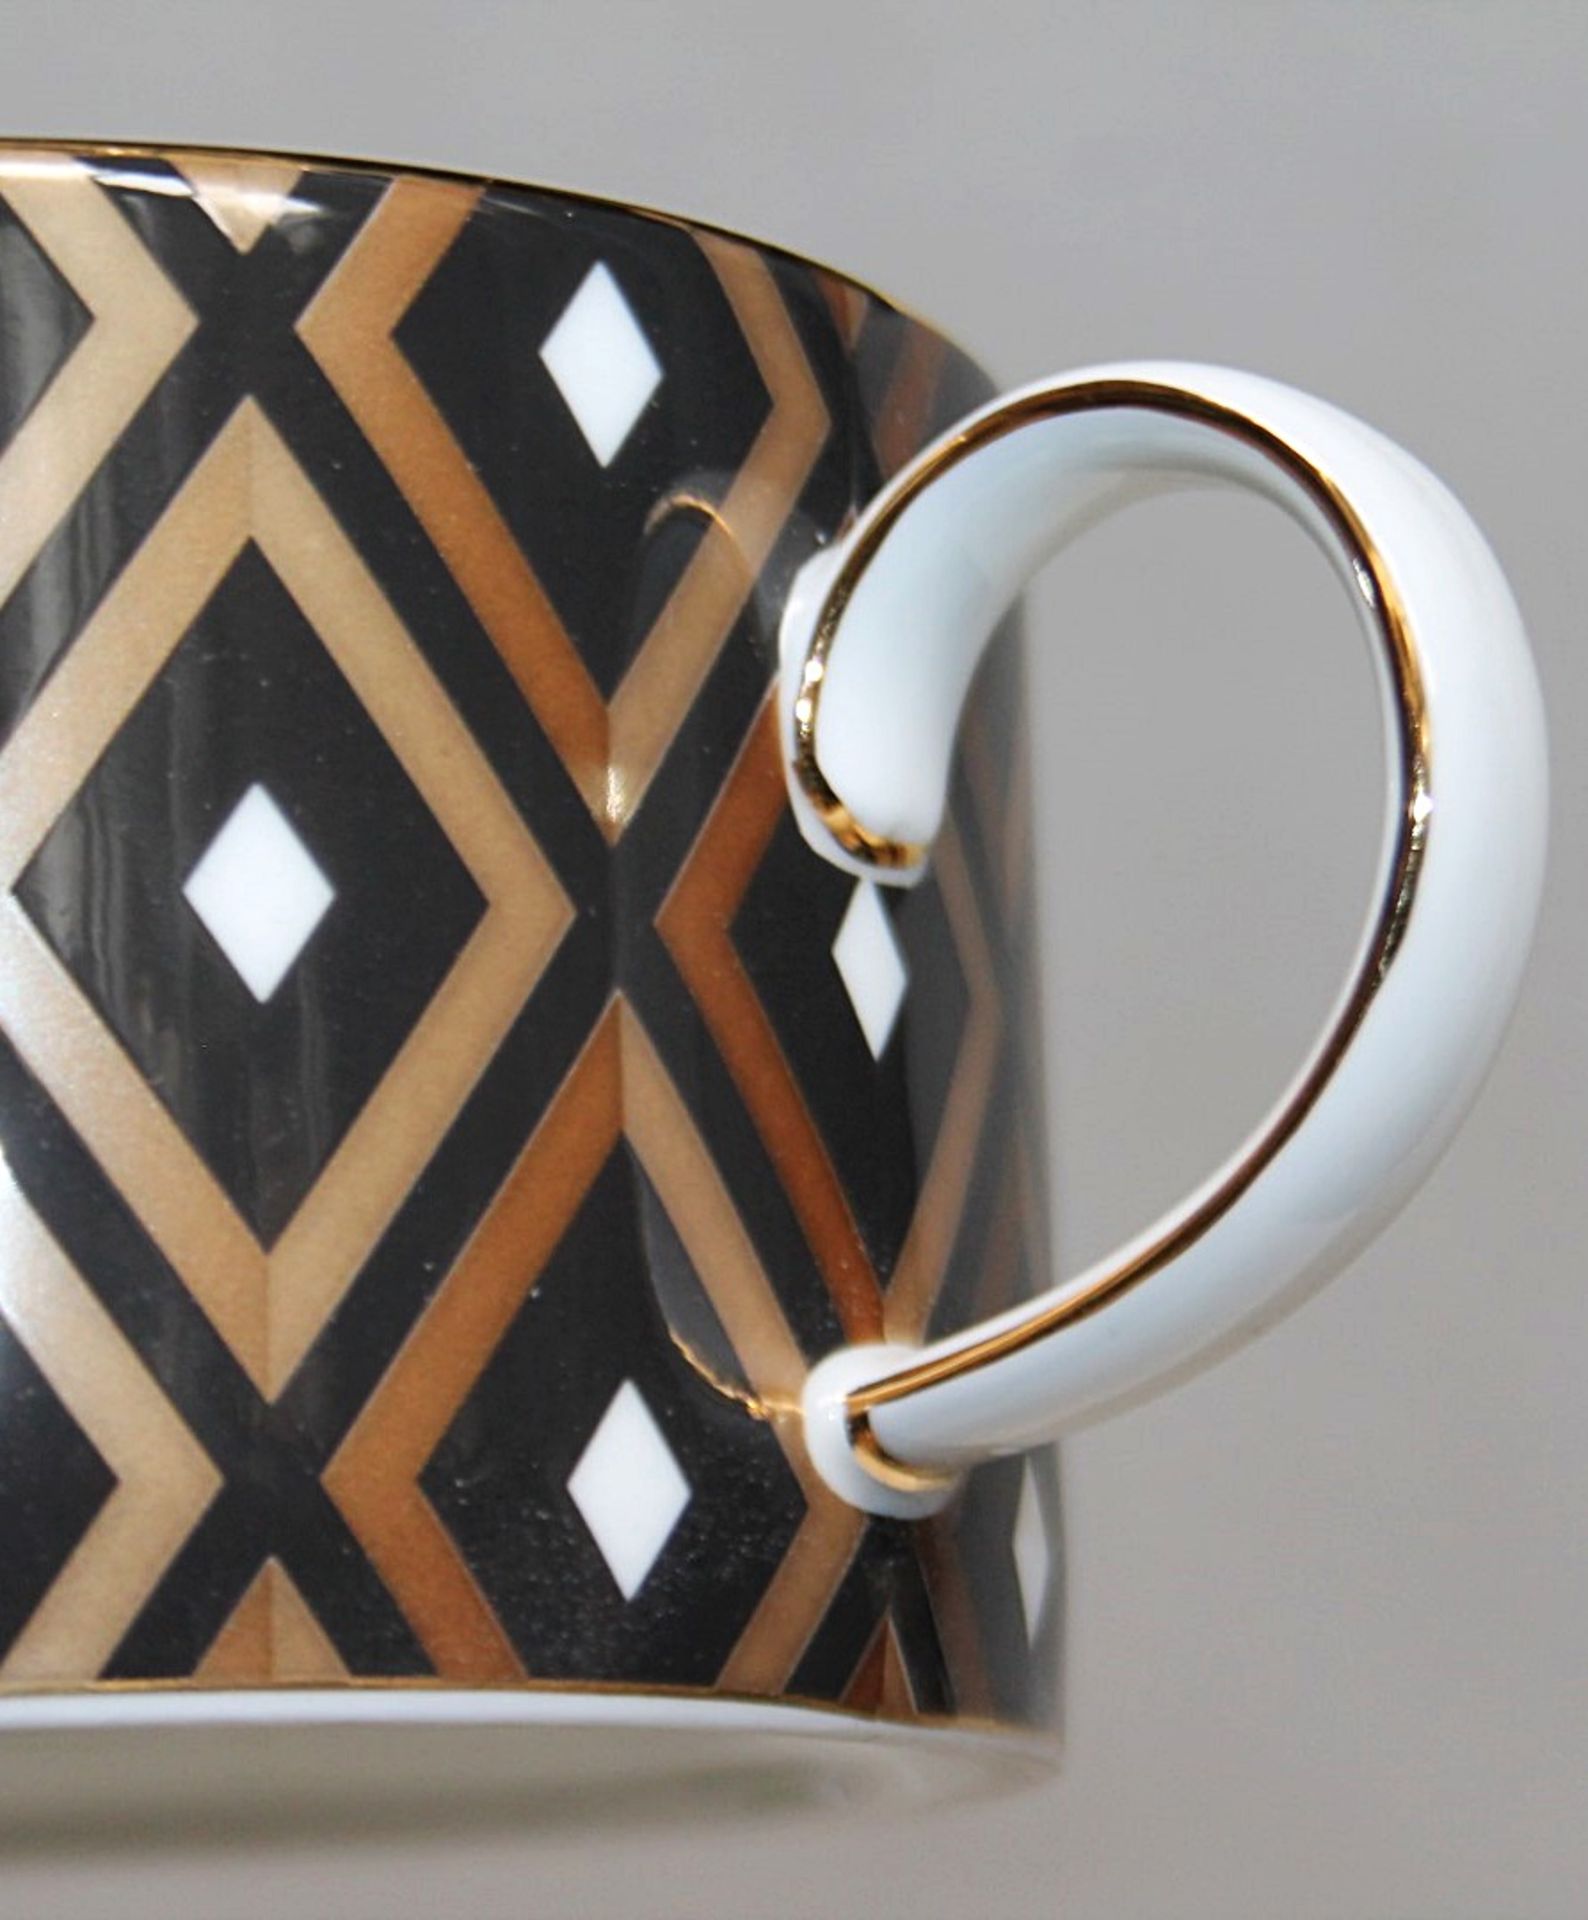 1 x WEDGWOOD 'Arris' Fine Bone China Teacup and Saucer, With An Art Deco Geometric print - Boxed - Image 2 of 6